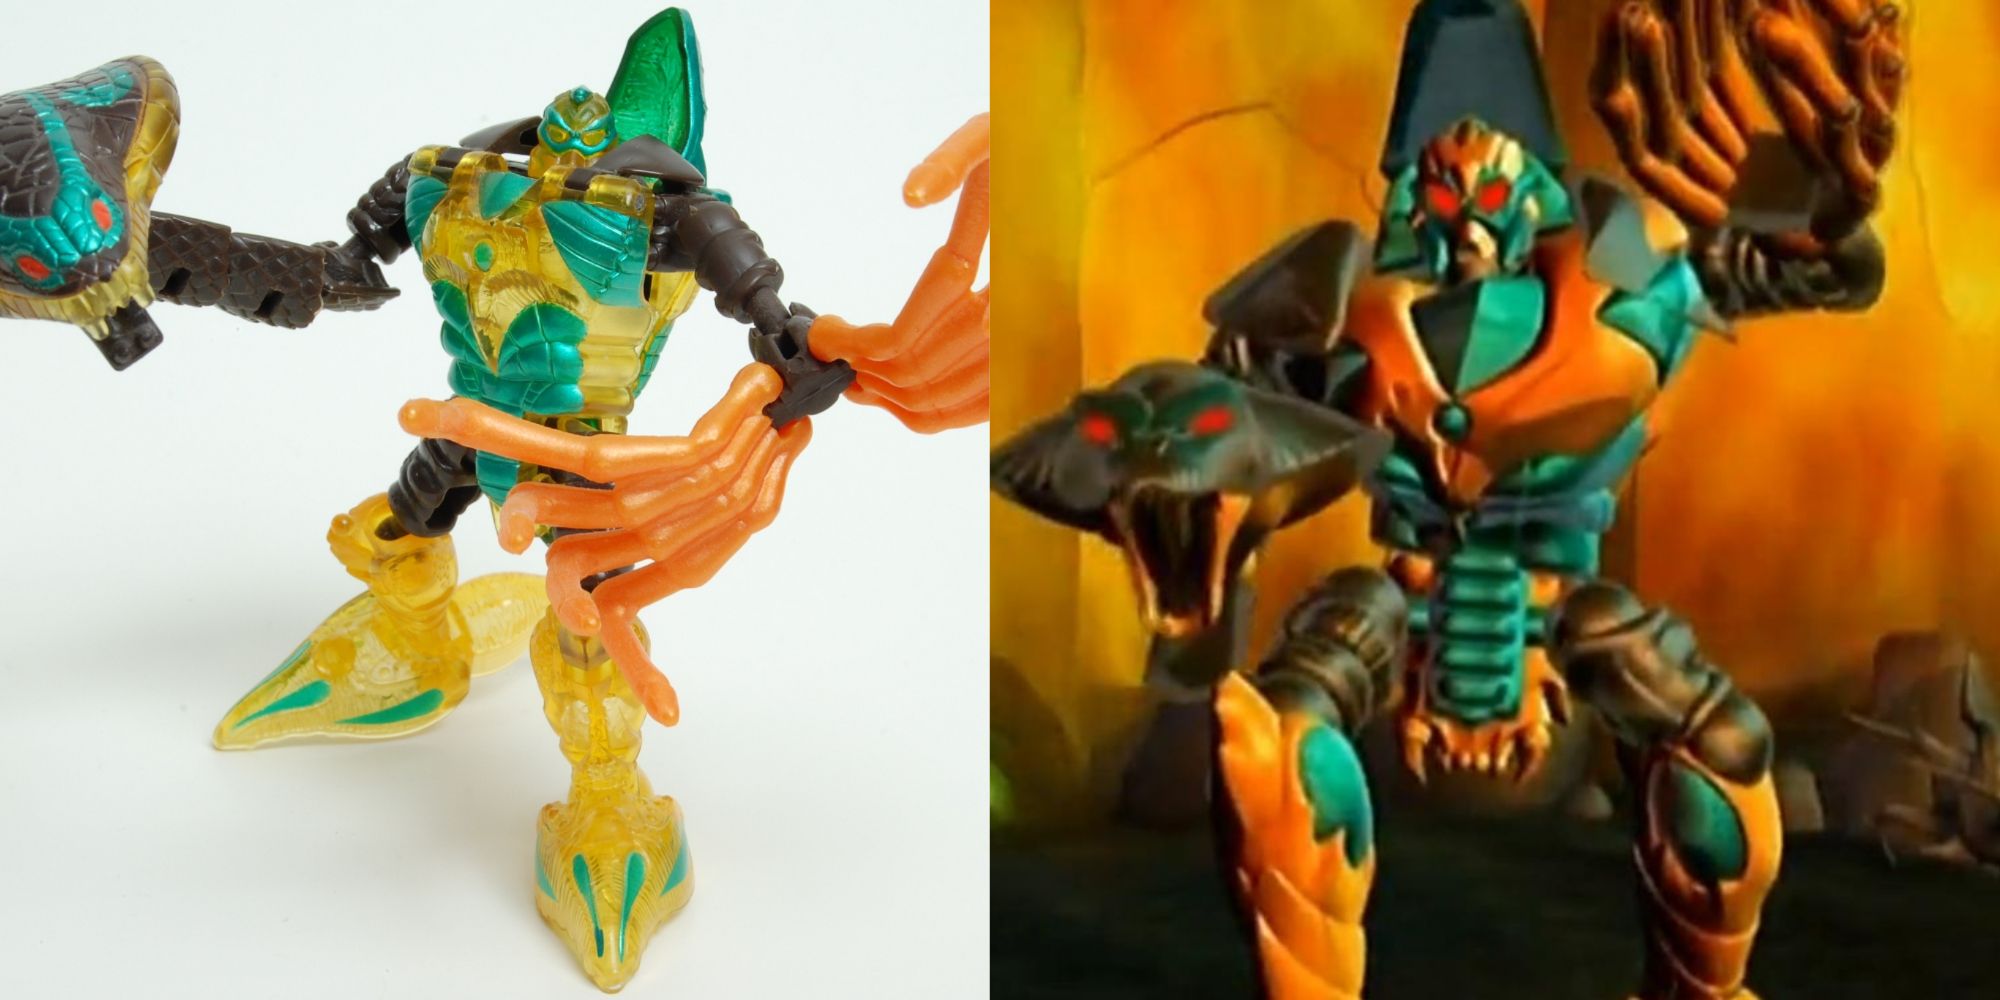 Quickstrike's toy and his character in Beast Wars.